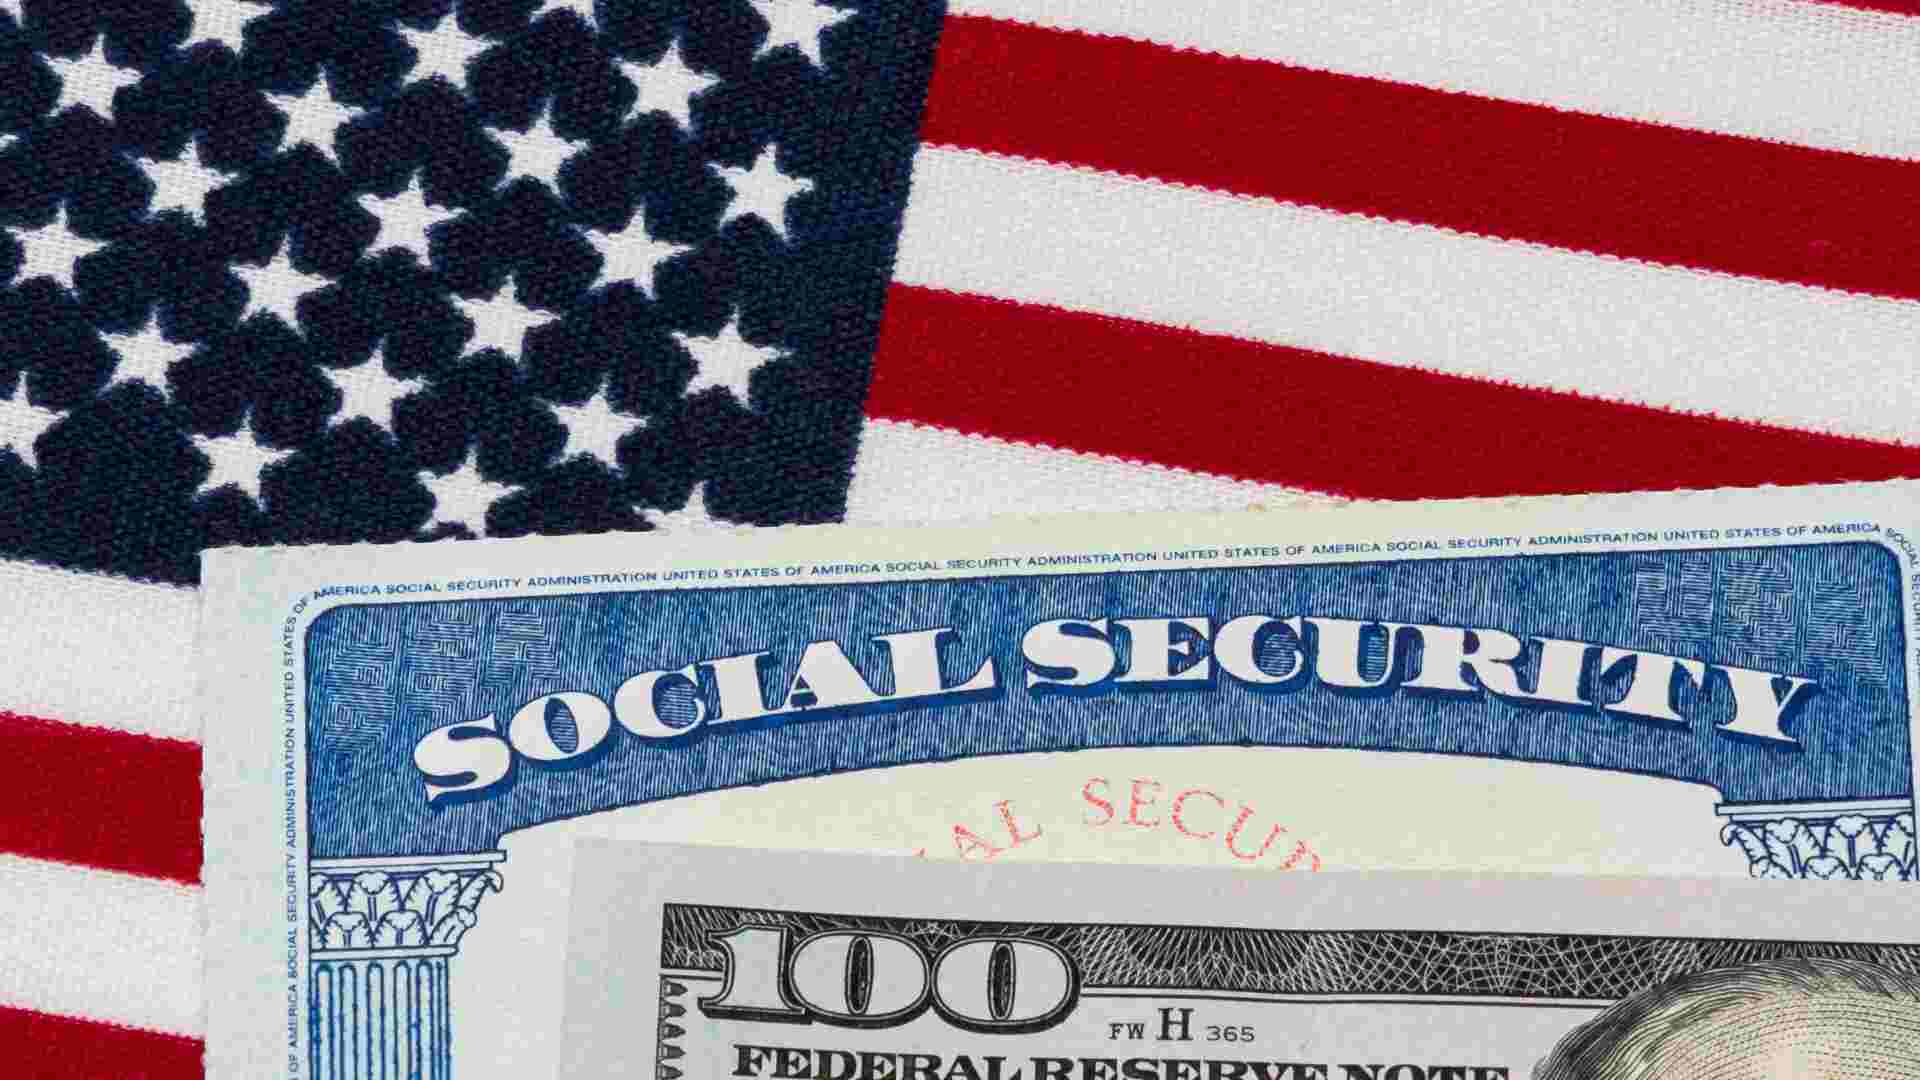 Social Security payment amounts for Saint Valentine's day, check if you qualify